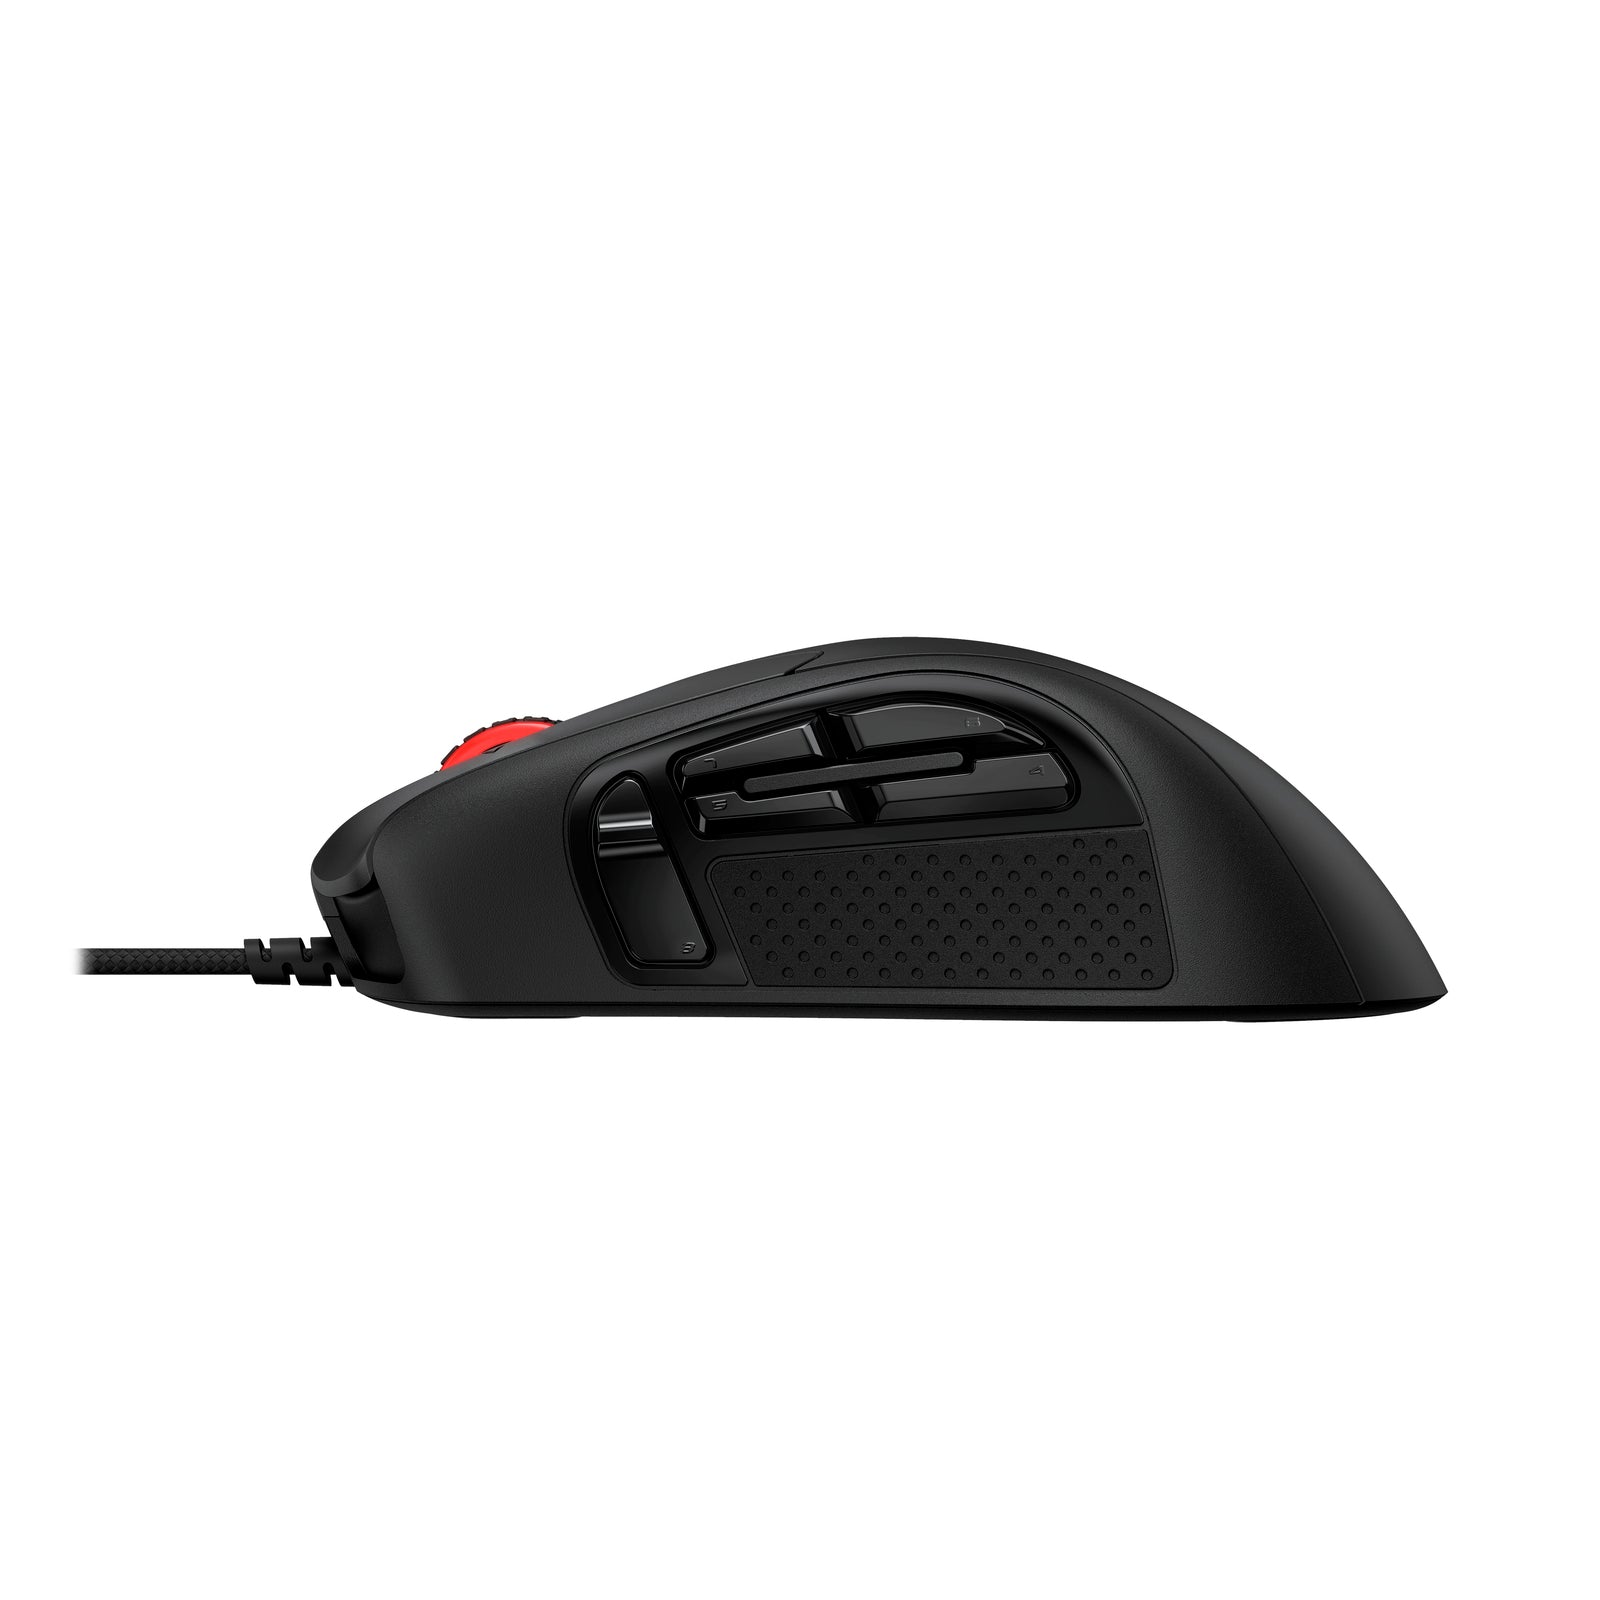 HyperX Pulsefire Raid Gaming Mouse Side View Highlighting Buttons